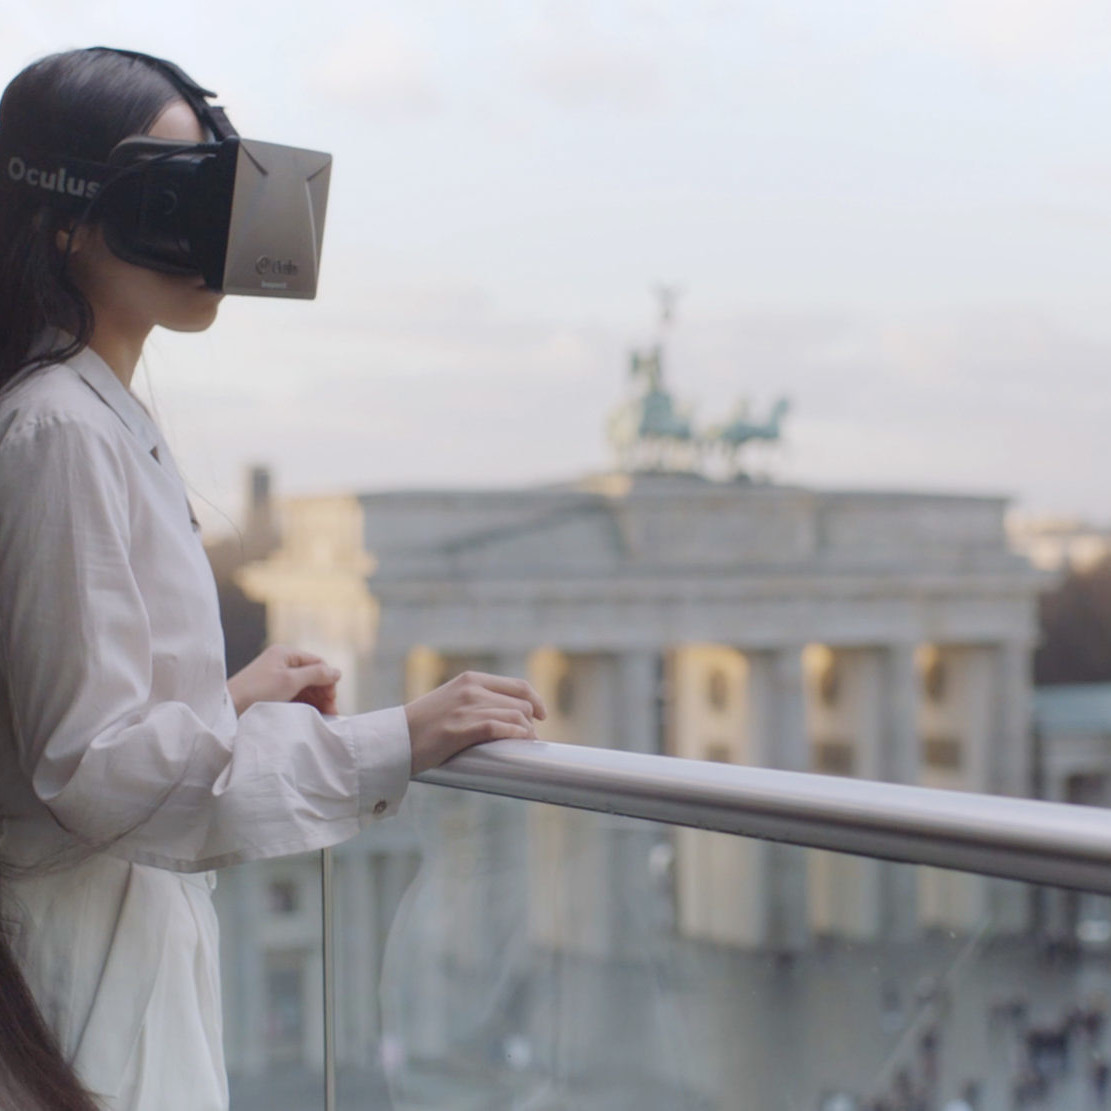 Long-haired woman wearing an Oculus VR headset stands at balcony railing overlooking Pariser Platz in Berlin